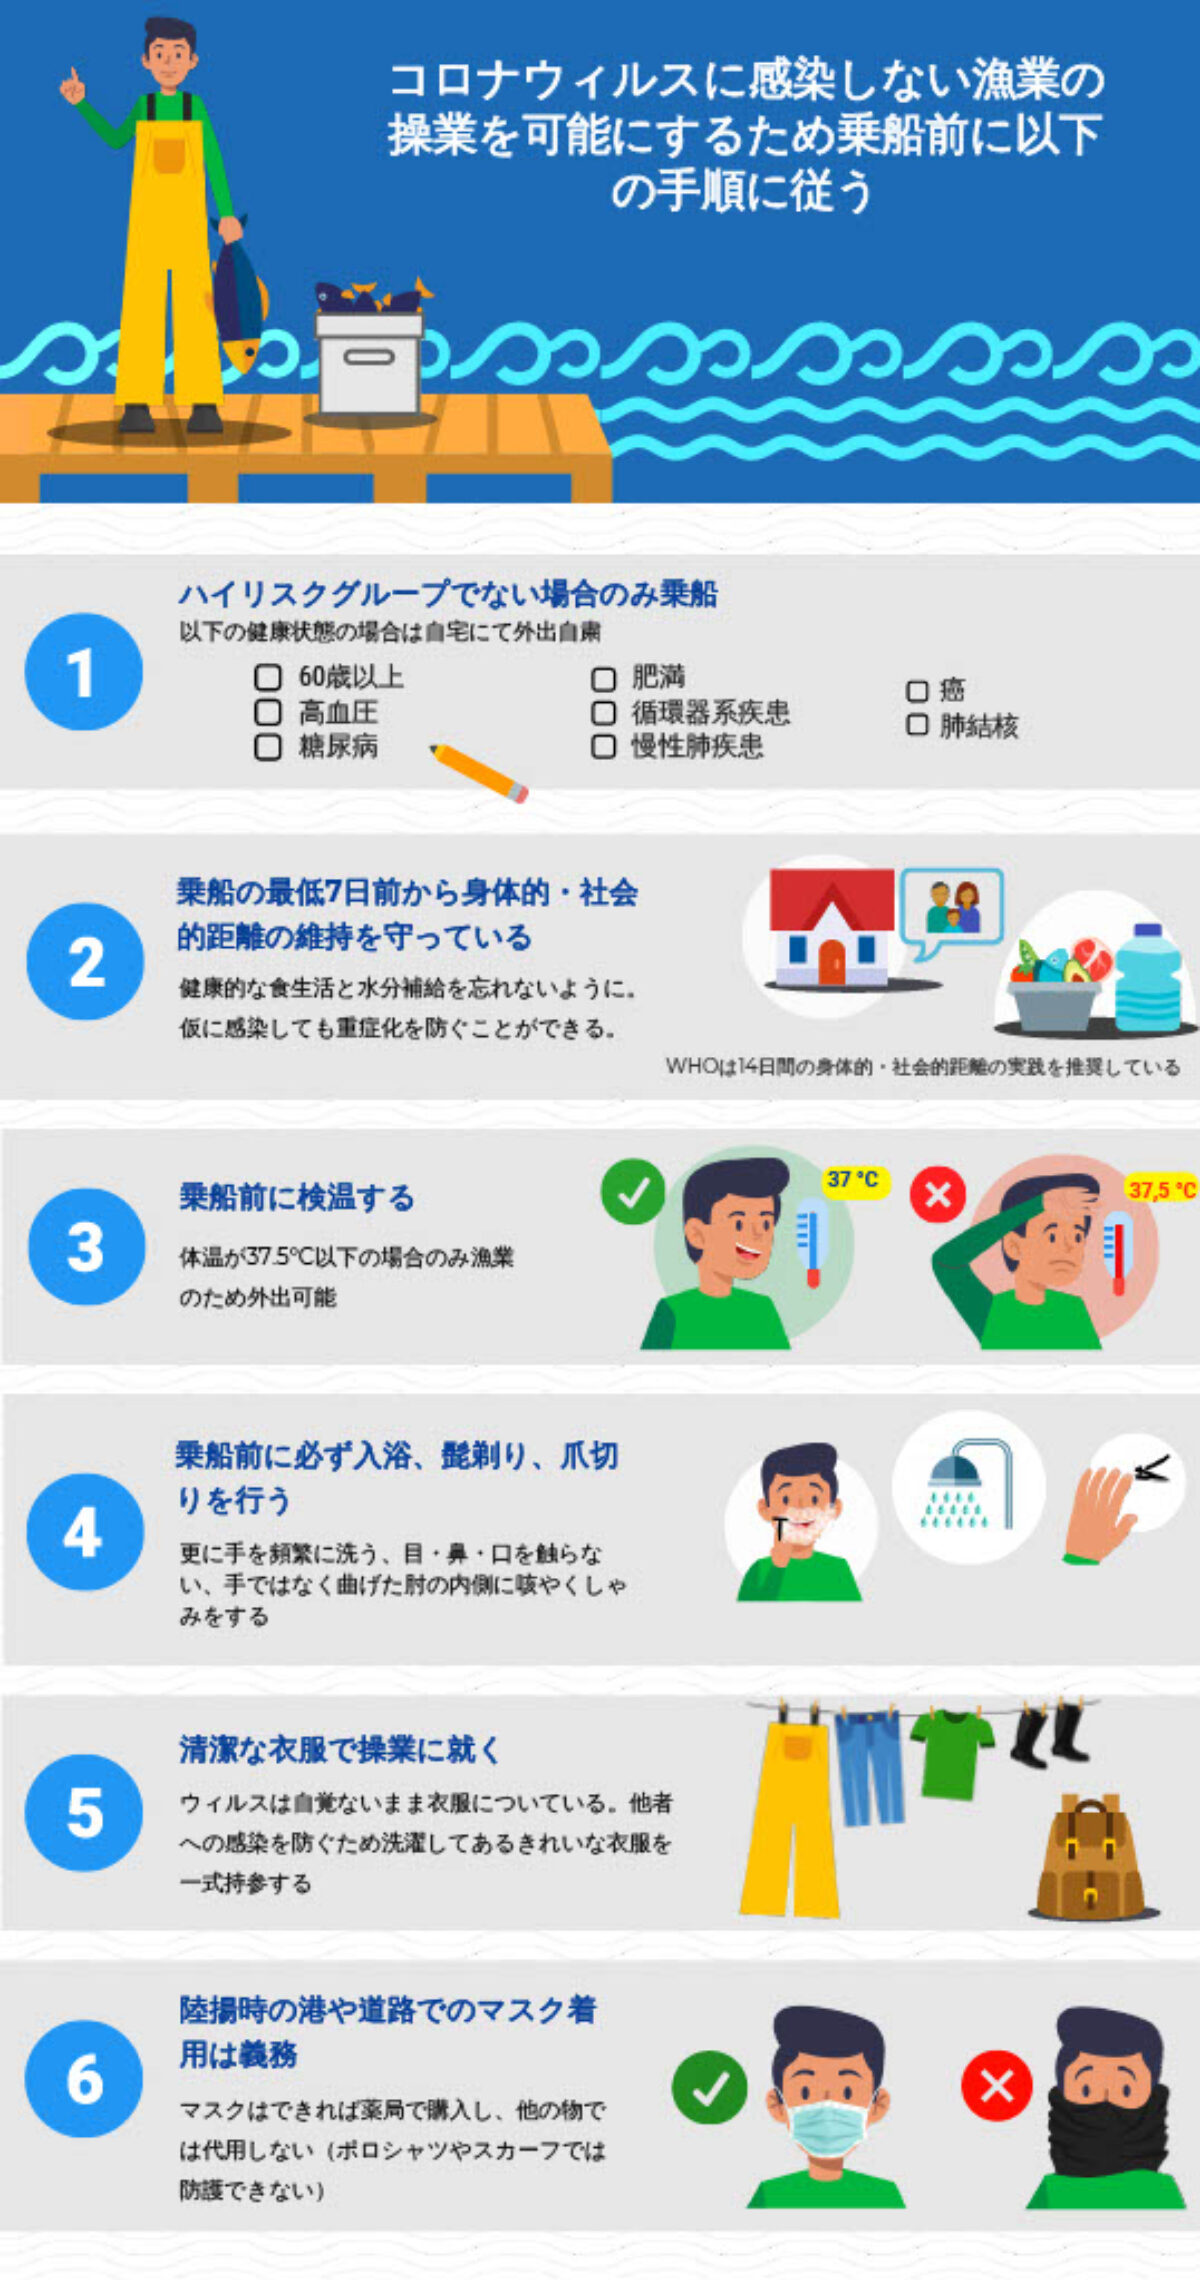 Japanese COVID infographic